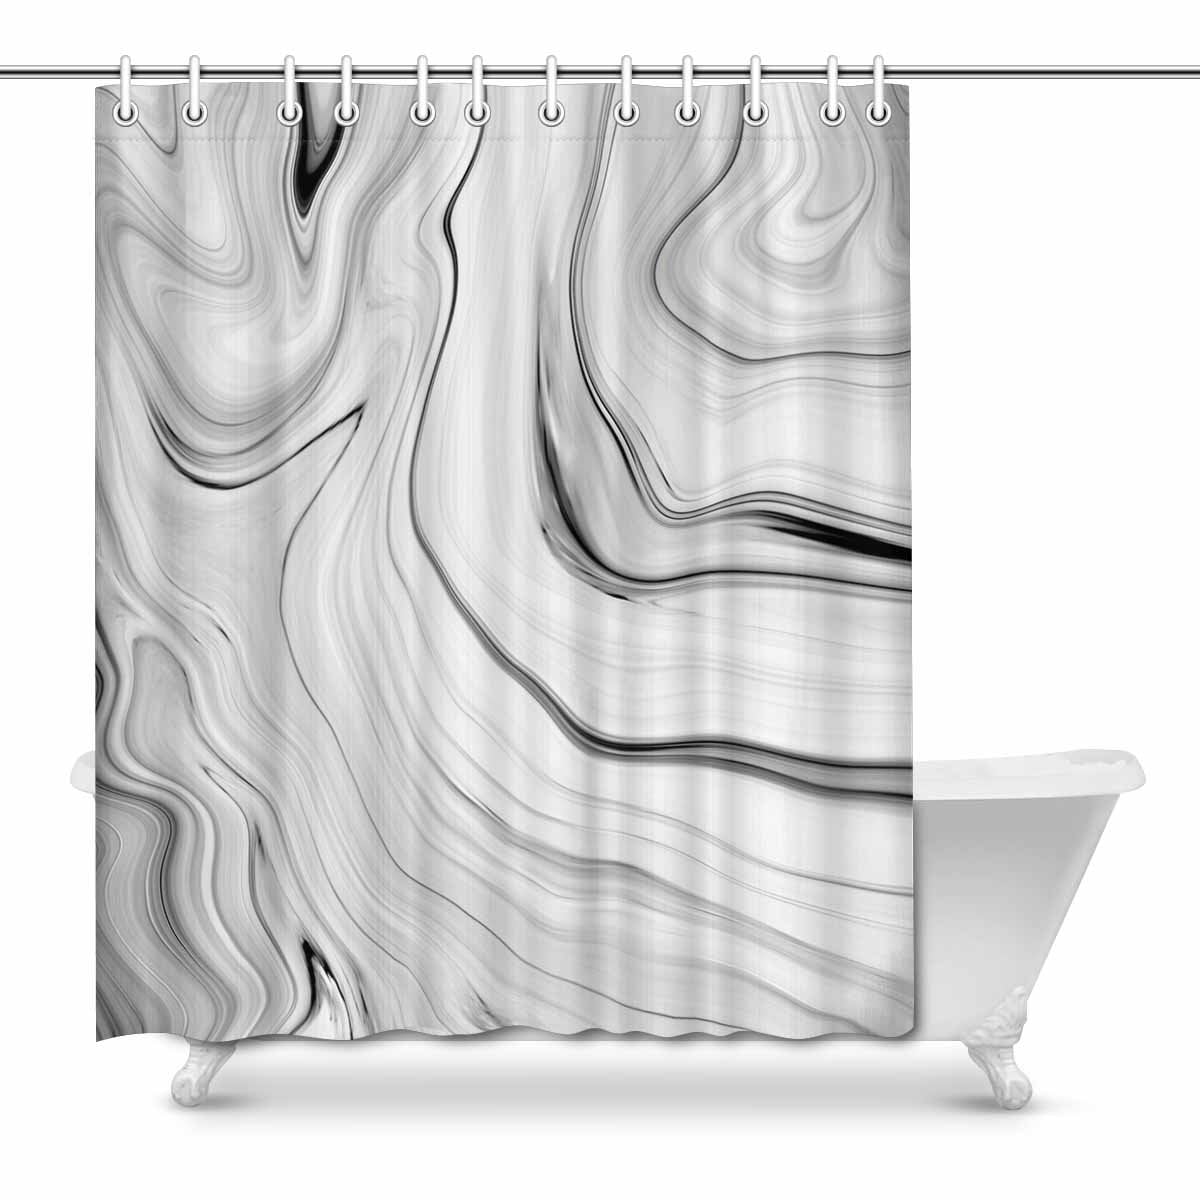 Marble Texture Shower Curtain Nature Stone Color Background Pattern Luxurious Graphic Print Polyester Fabric Bathroom Decor Sets with Hooks 60 x 72 Inches Gold Grey White